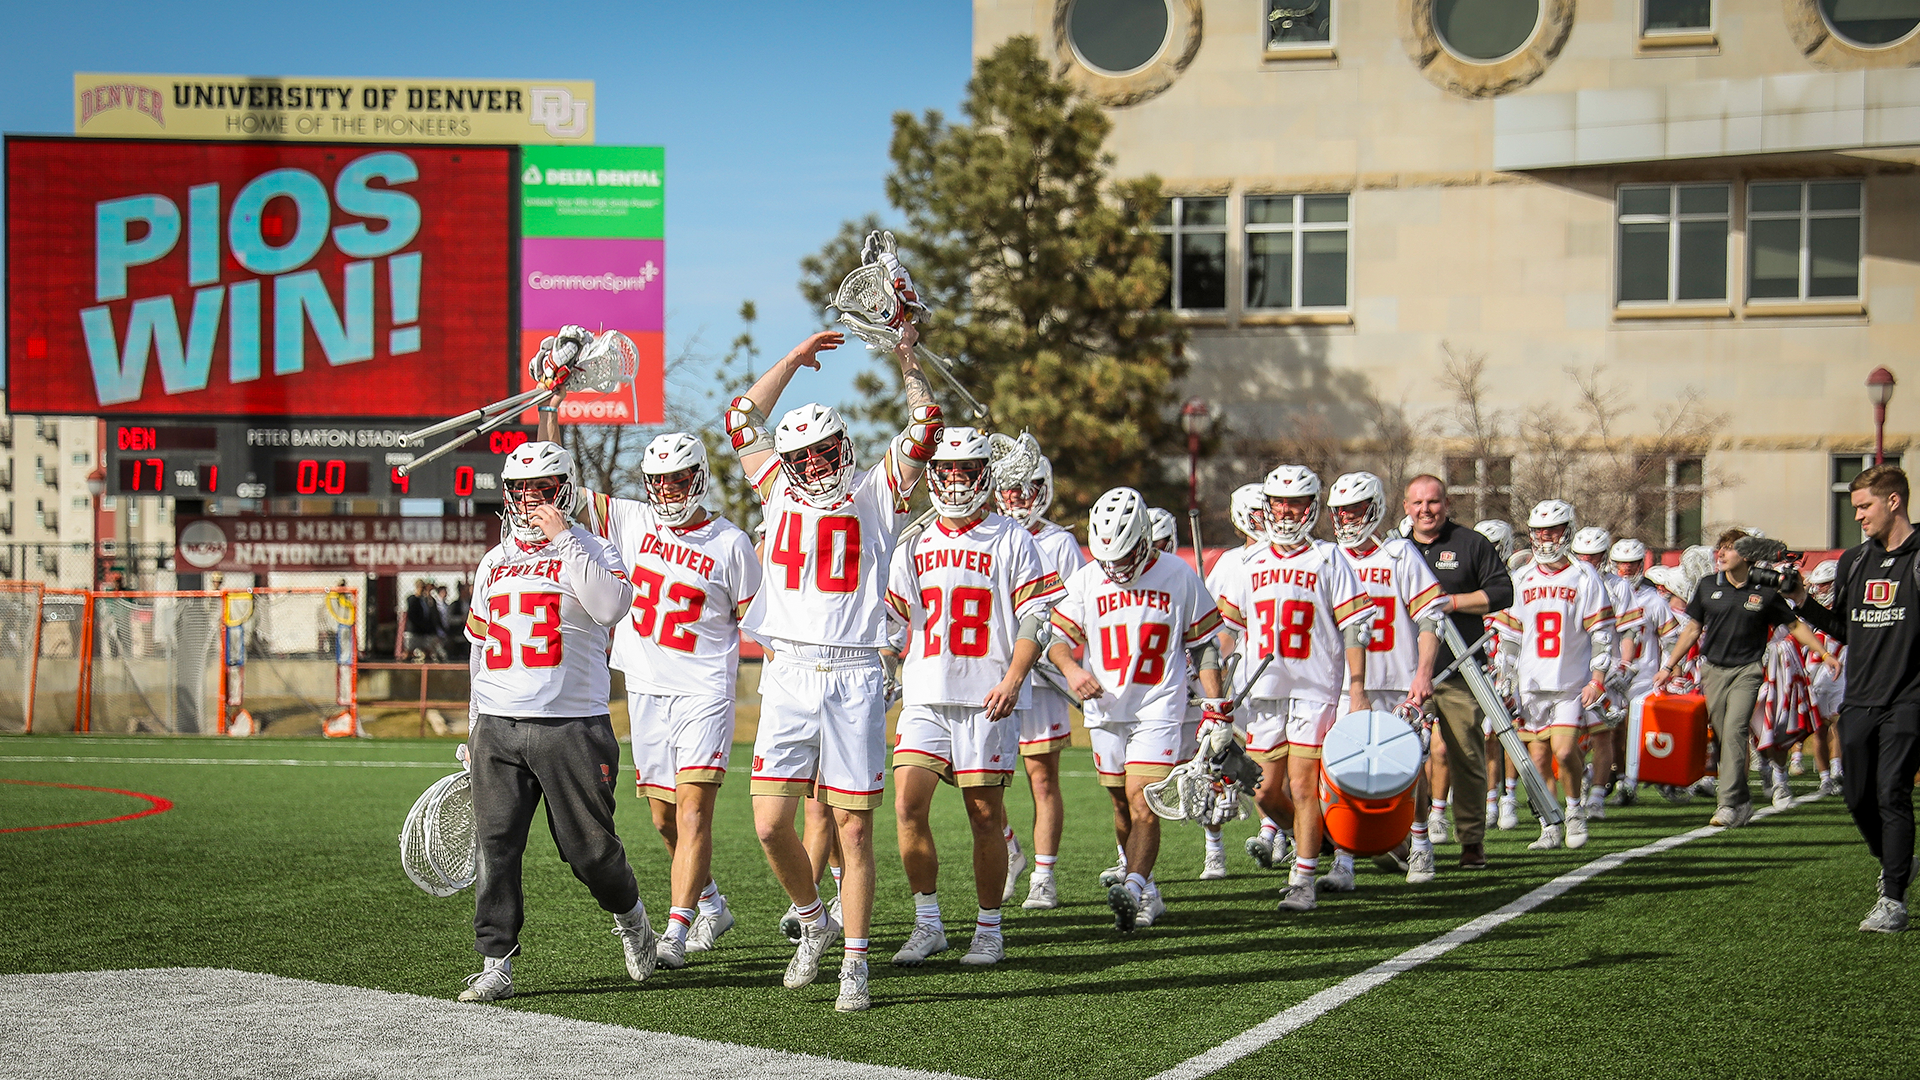 Denver celebrates following its 17-16 victory over Cornell at Peter Barton Lacrosse Stadium.